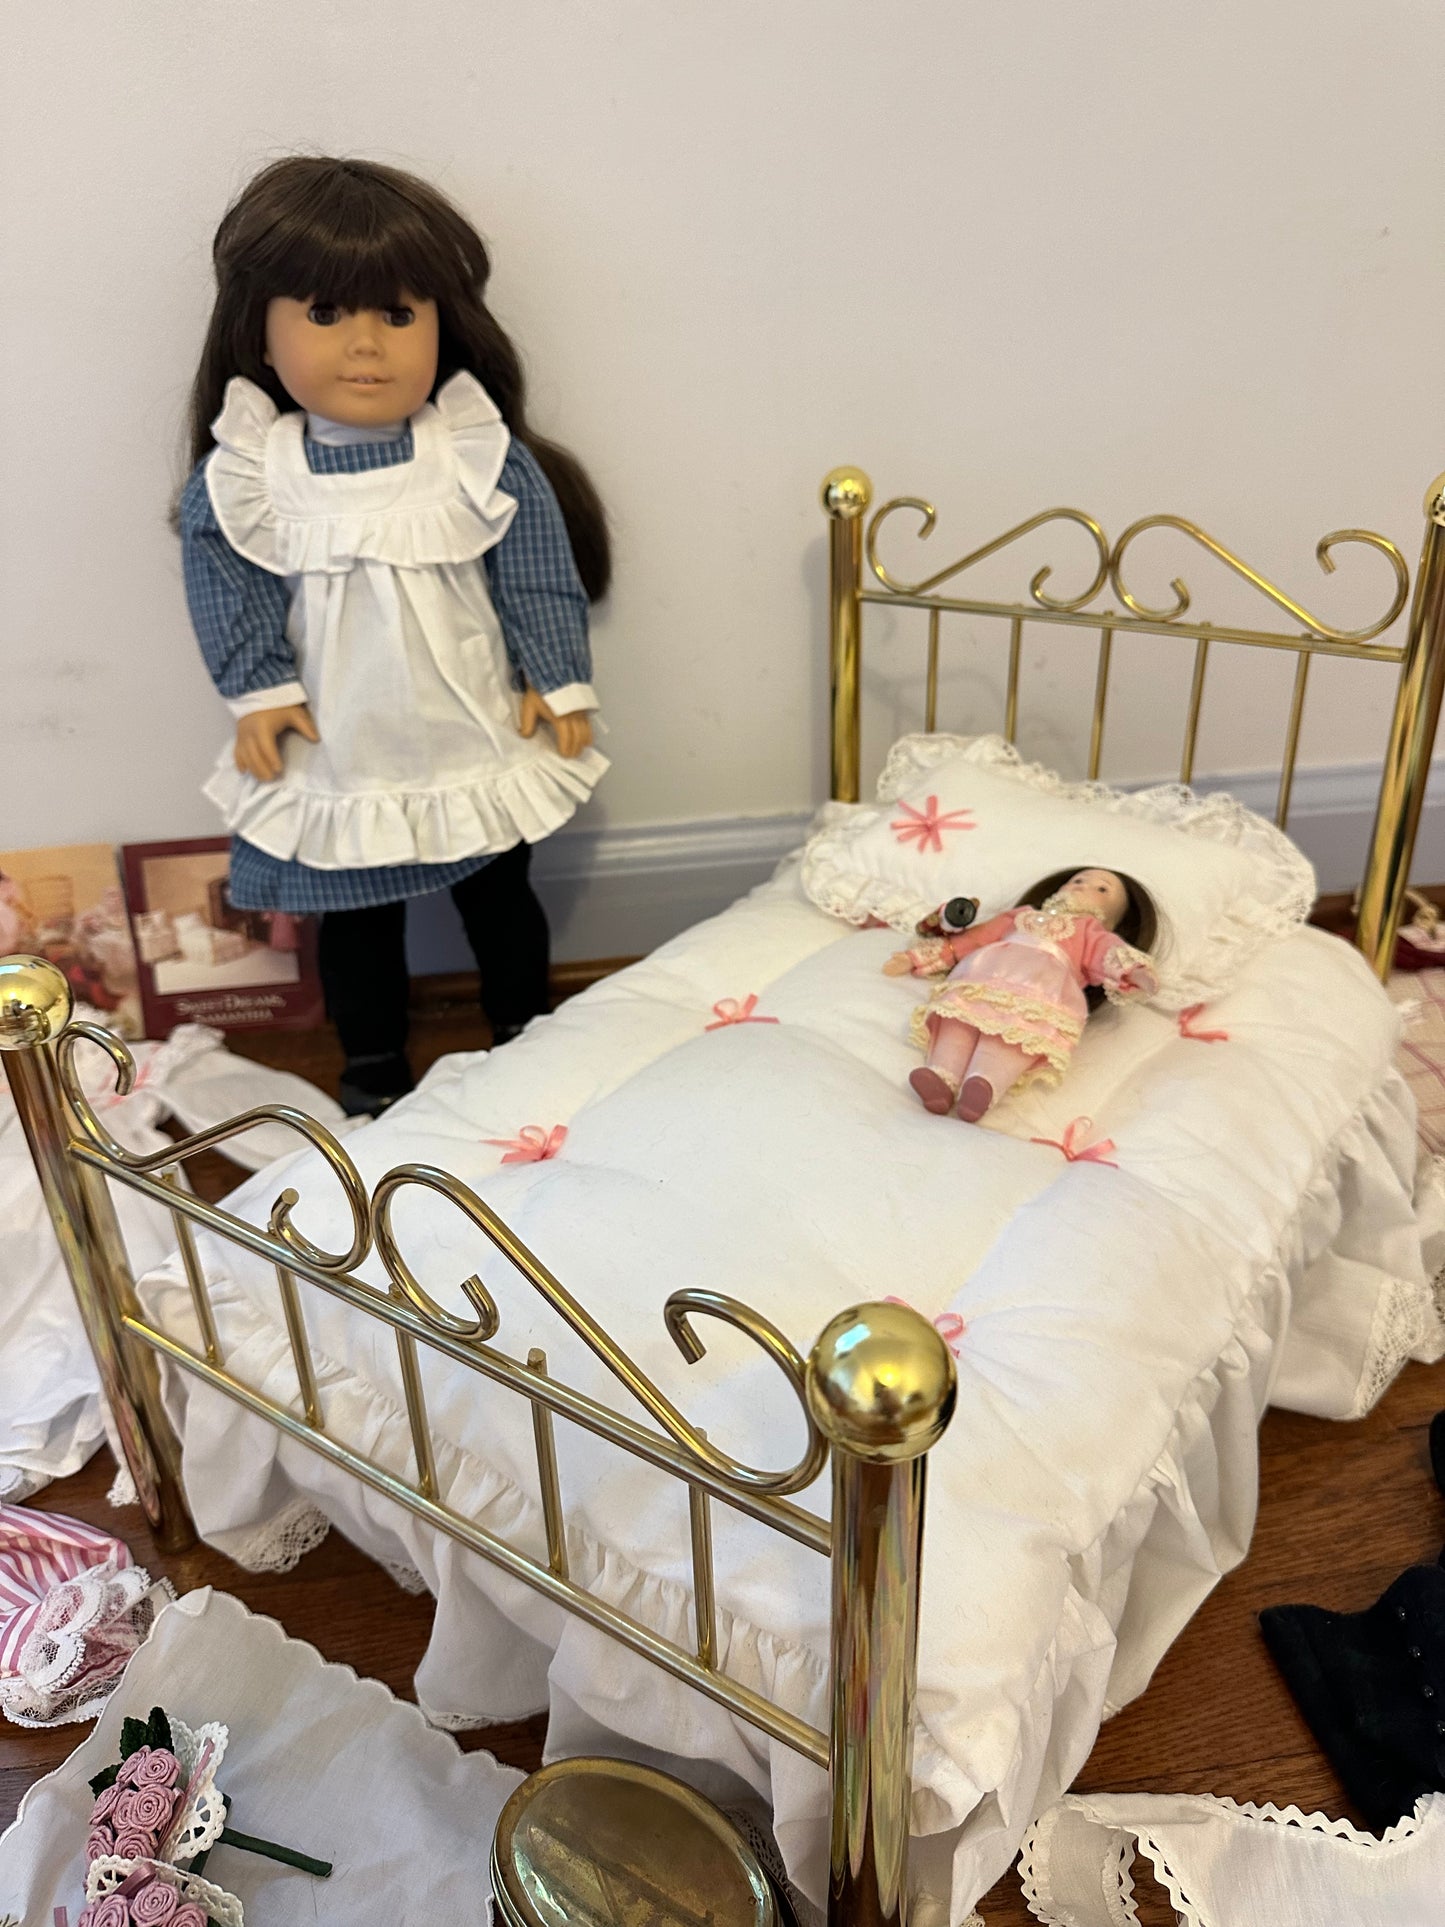 American Girl Doll Samantha+Bed+Clothing+Accessories